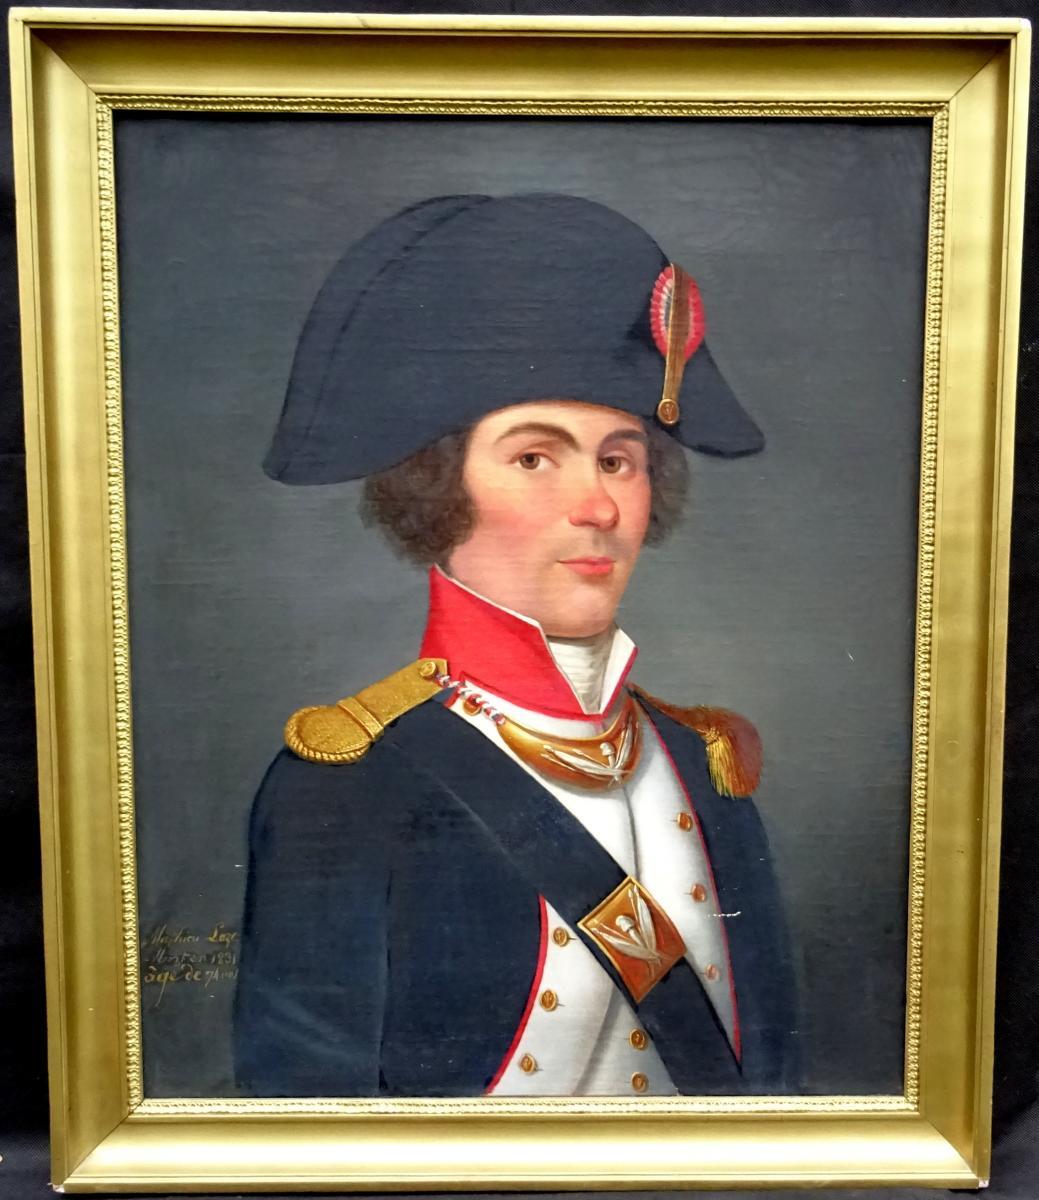 Unknown Figurative Painting - 18thc Portrait French National Guard Officer Mathieu Loze Wearing Bicorne Hat